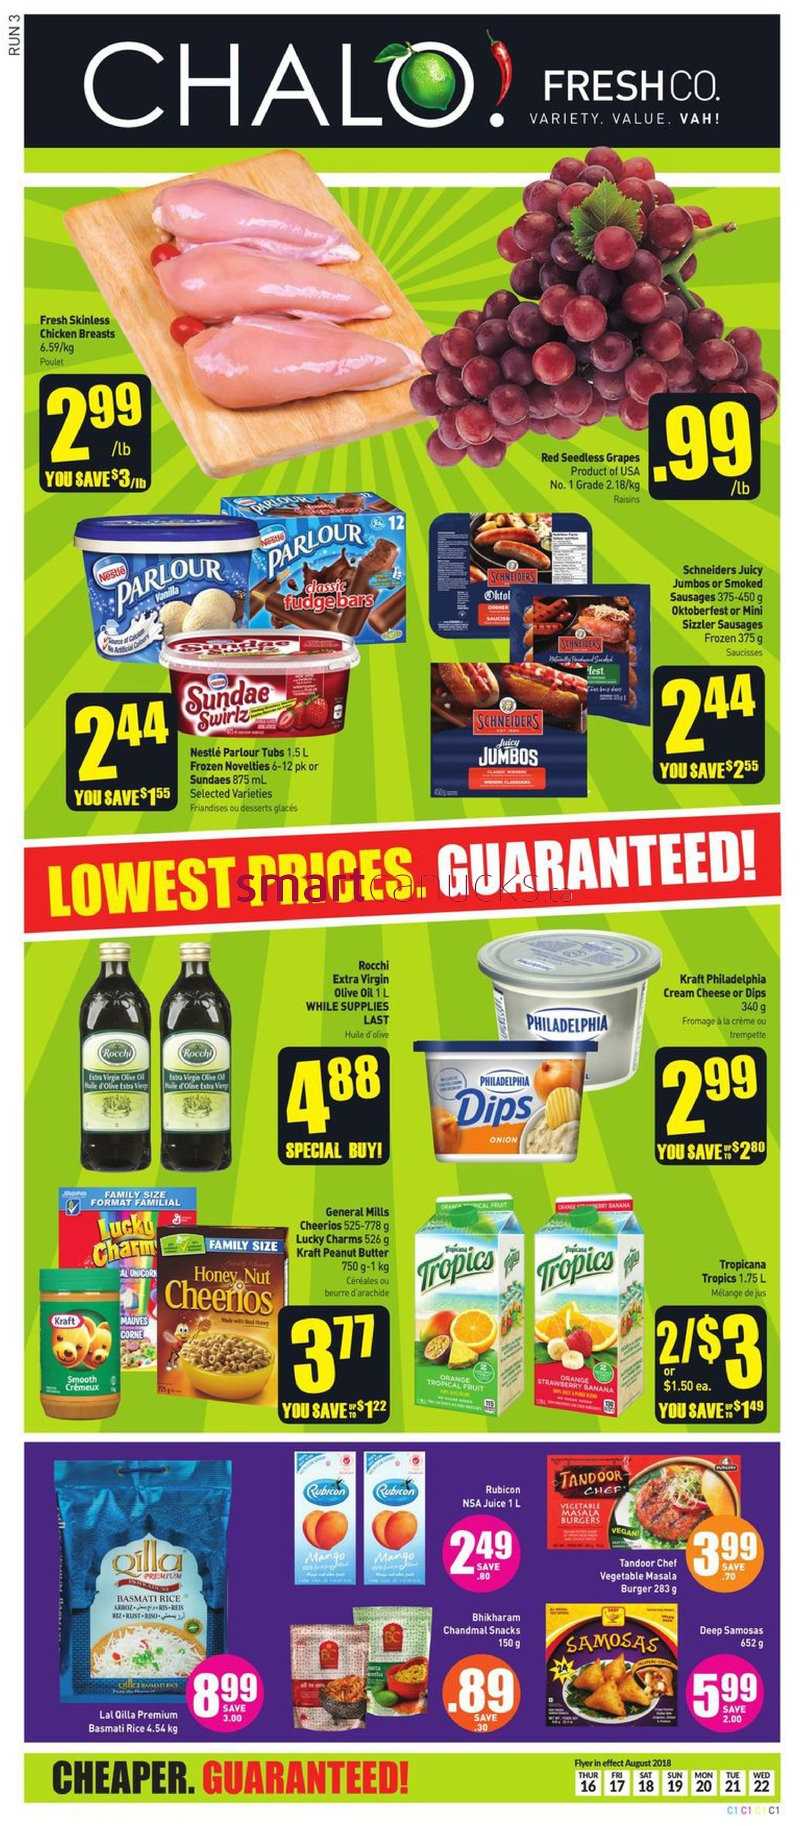 Chalo! FreshCo Flyer August 16 to 22